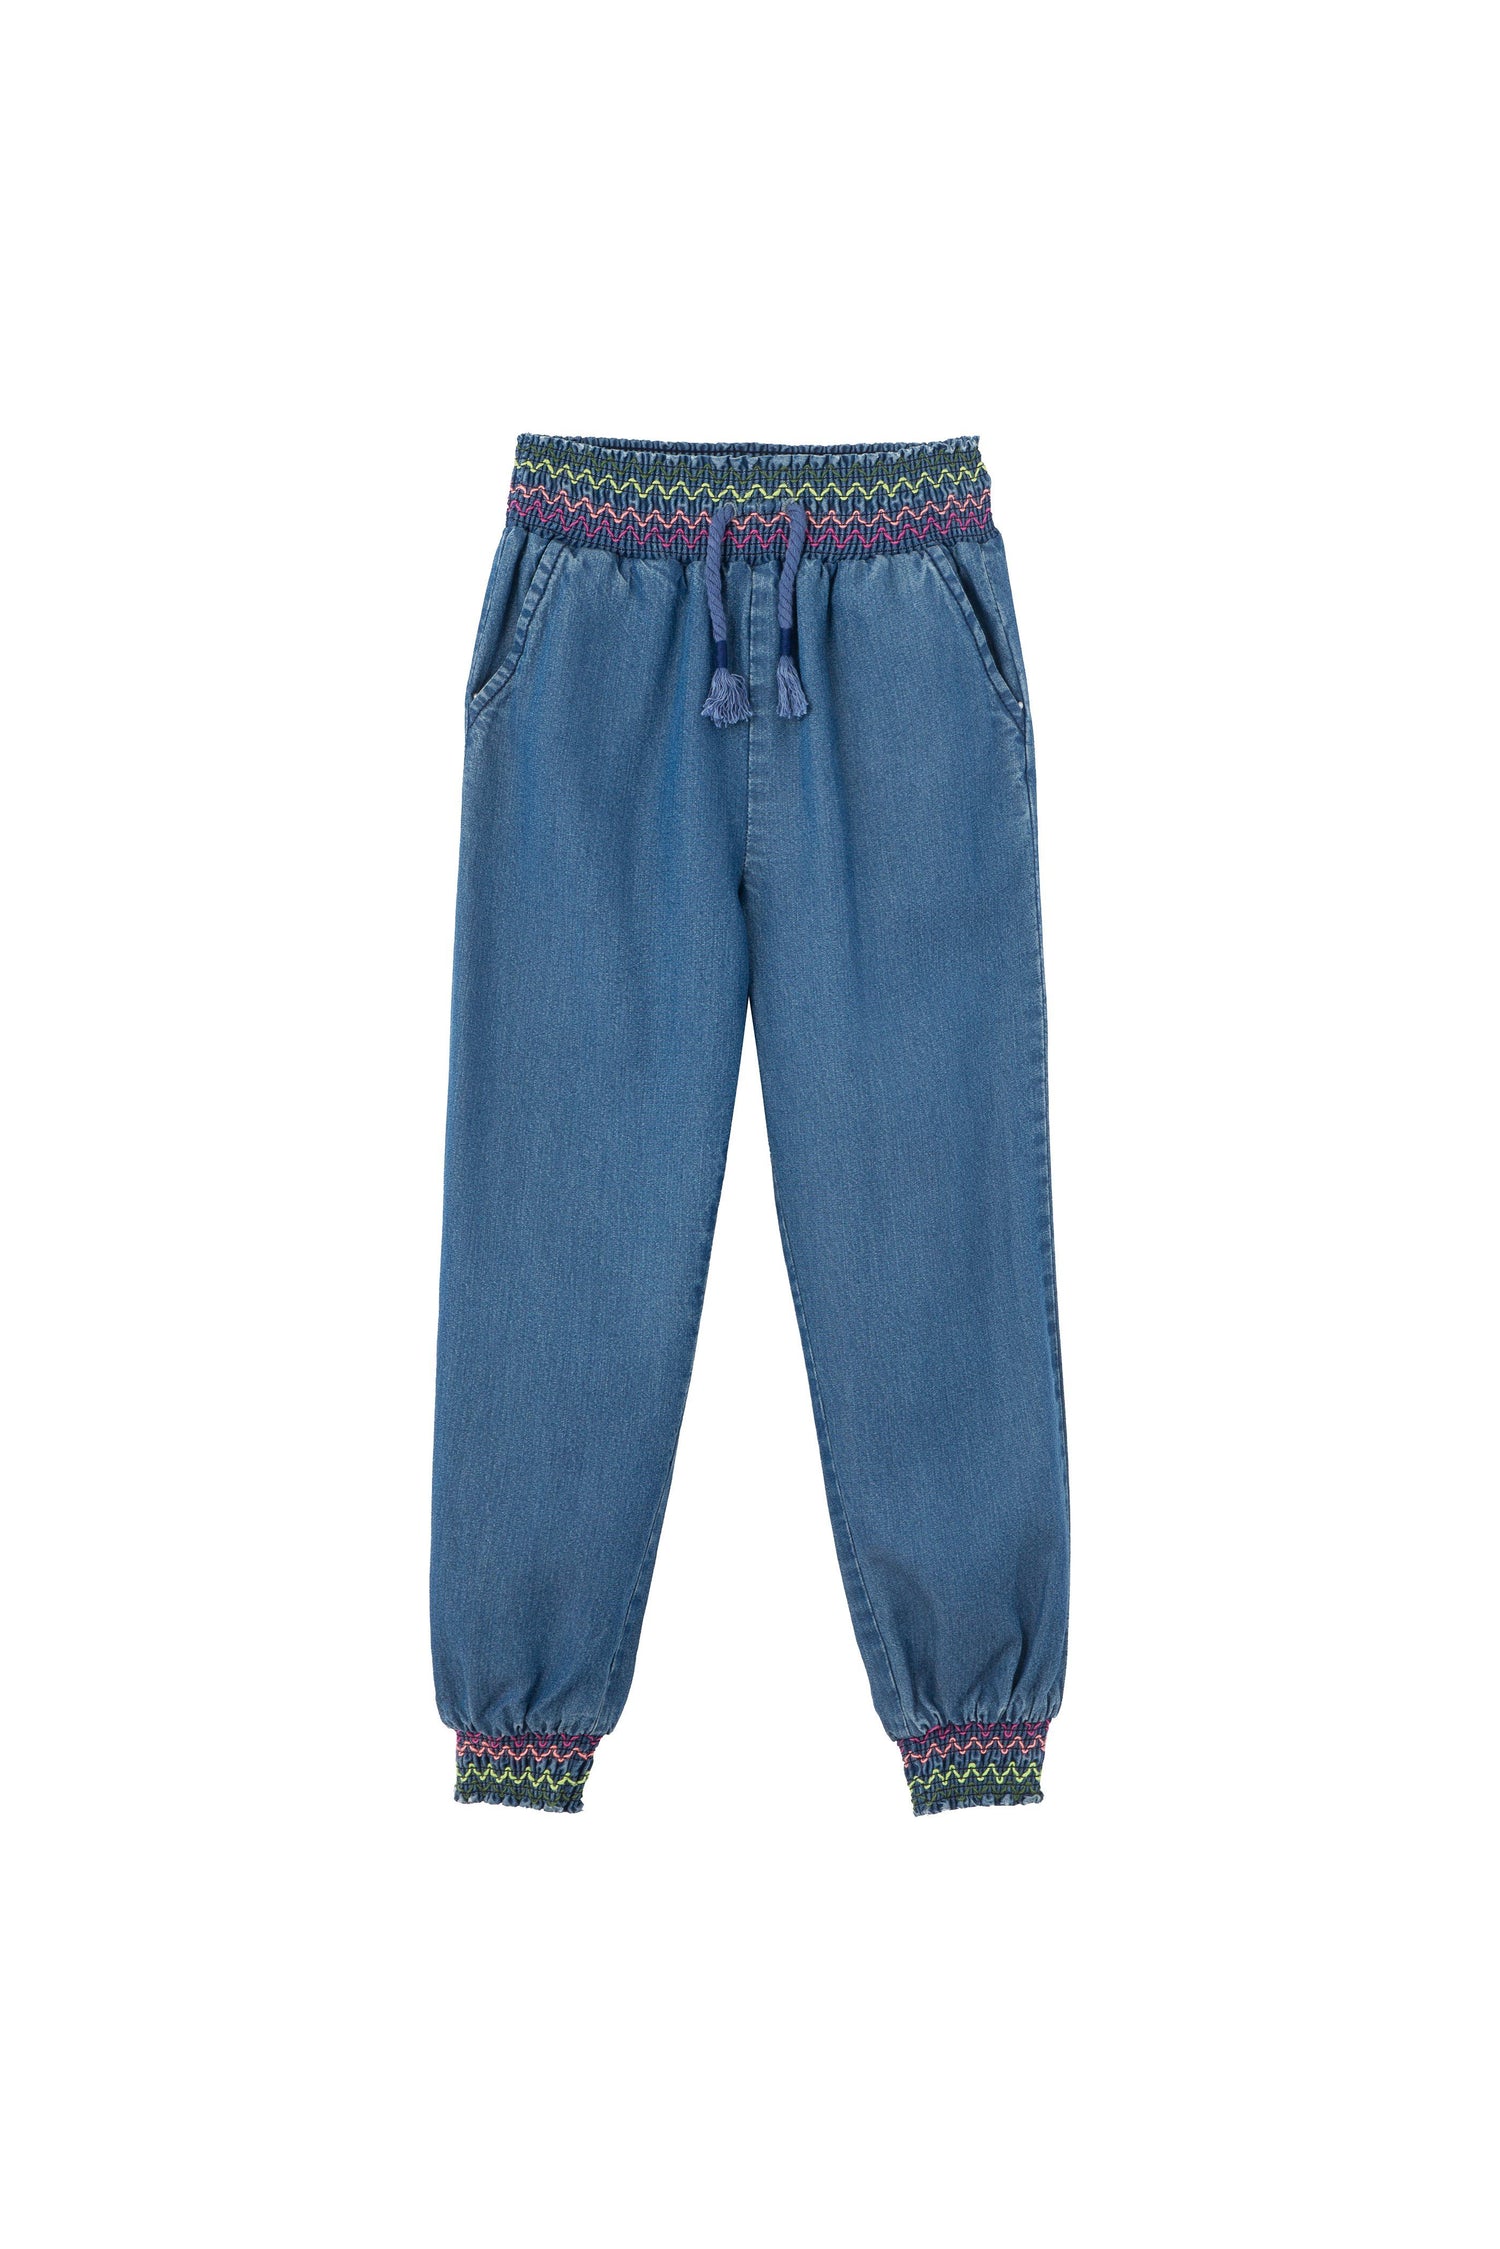 Denim jogger with faux drawstring with fringe and multi-color, zig-zag stitching on elastic waist and ankles.